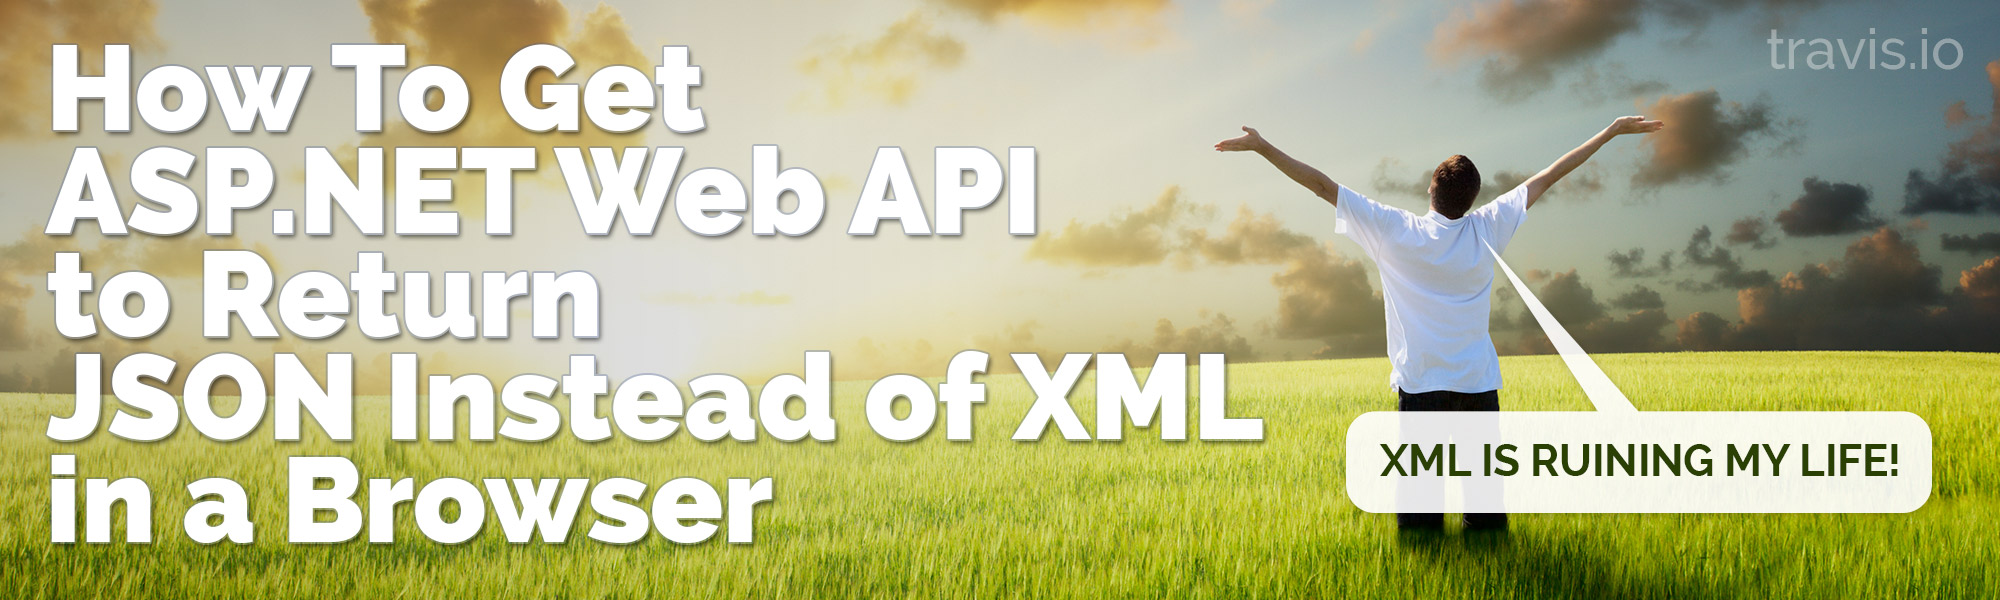 How To Get ASP.NET Web API to Return JSON Instead of XML in a Browser